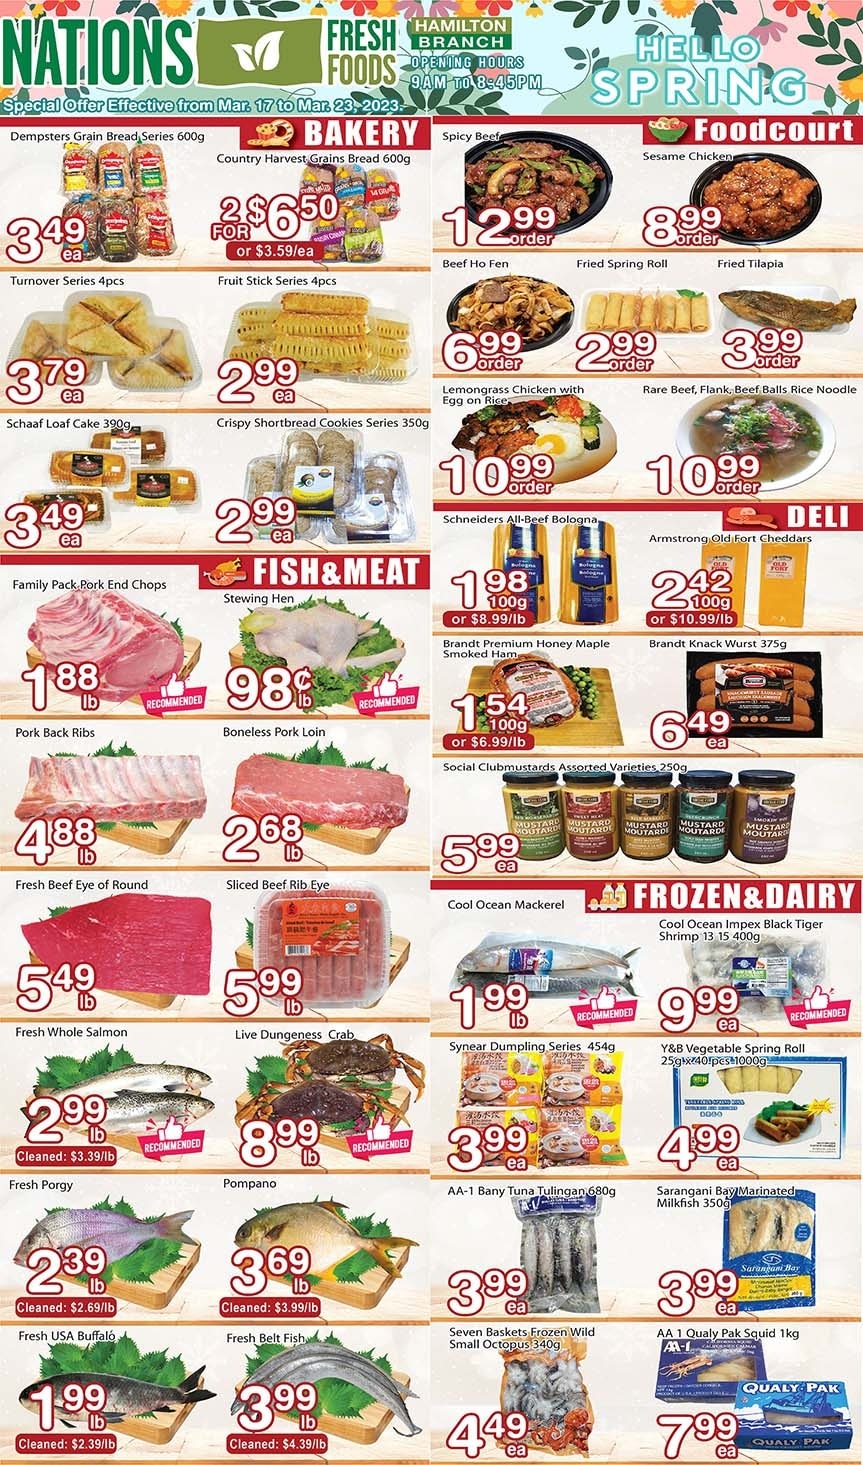 Nations Fresh Foods - Hamilton - Weekly Flyer Specials - Page 2